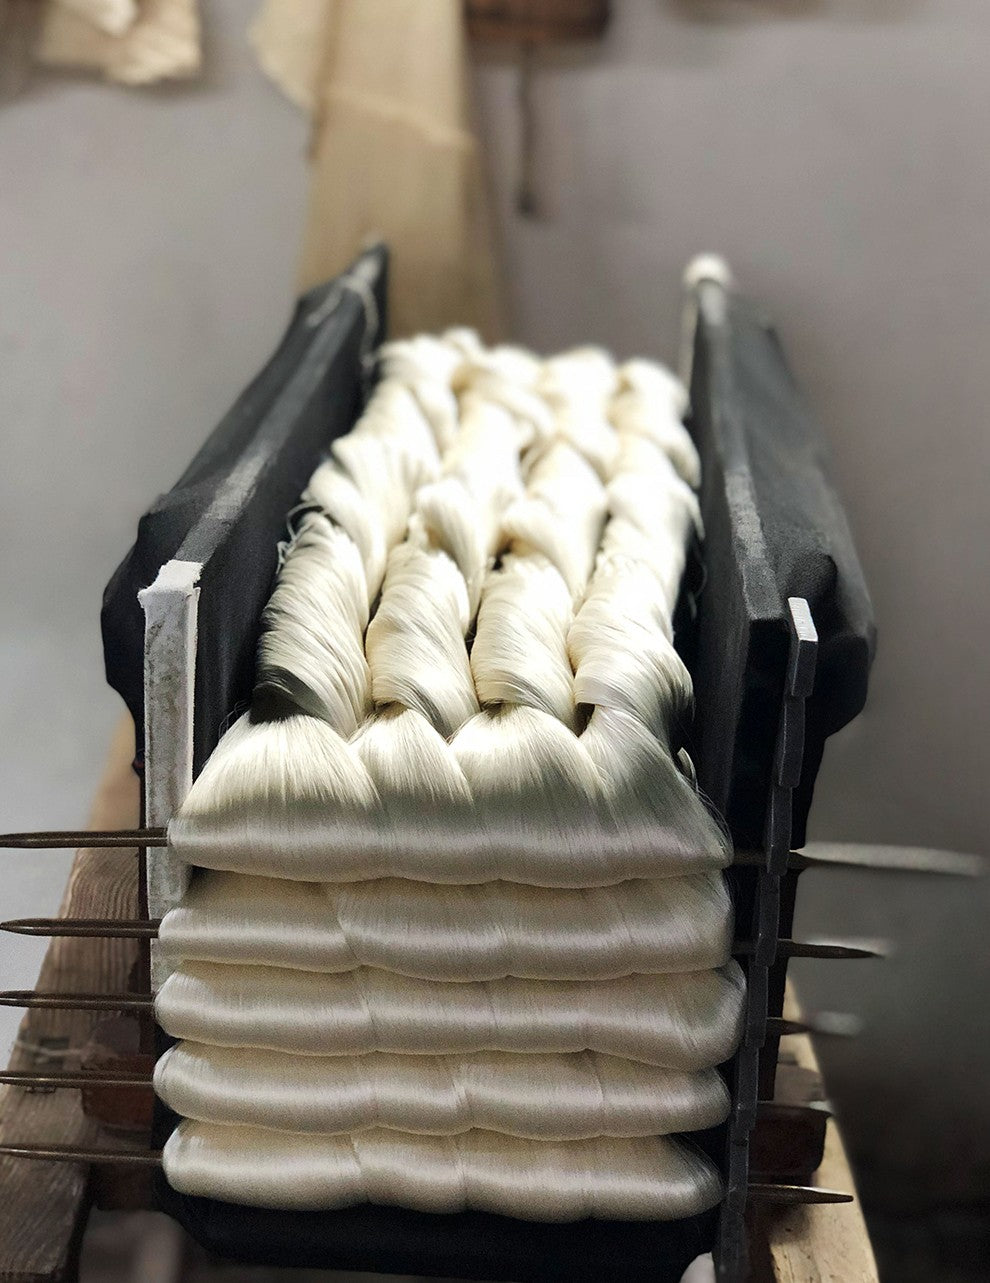 Yarn spools stacked on a textile machine.